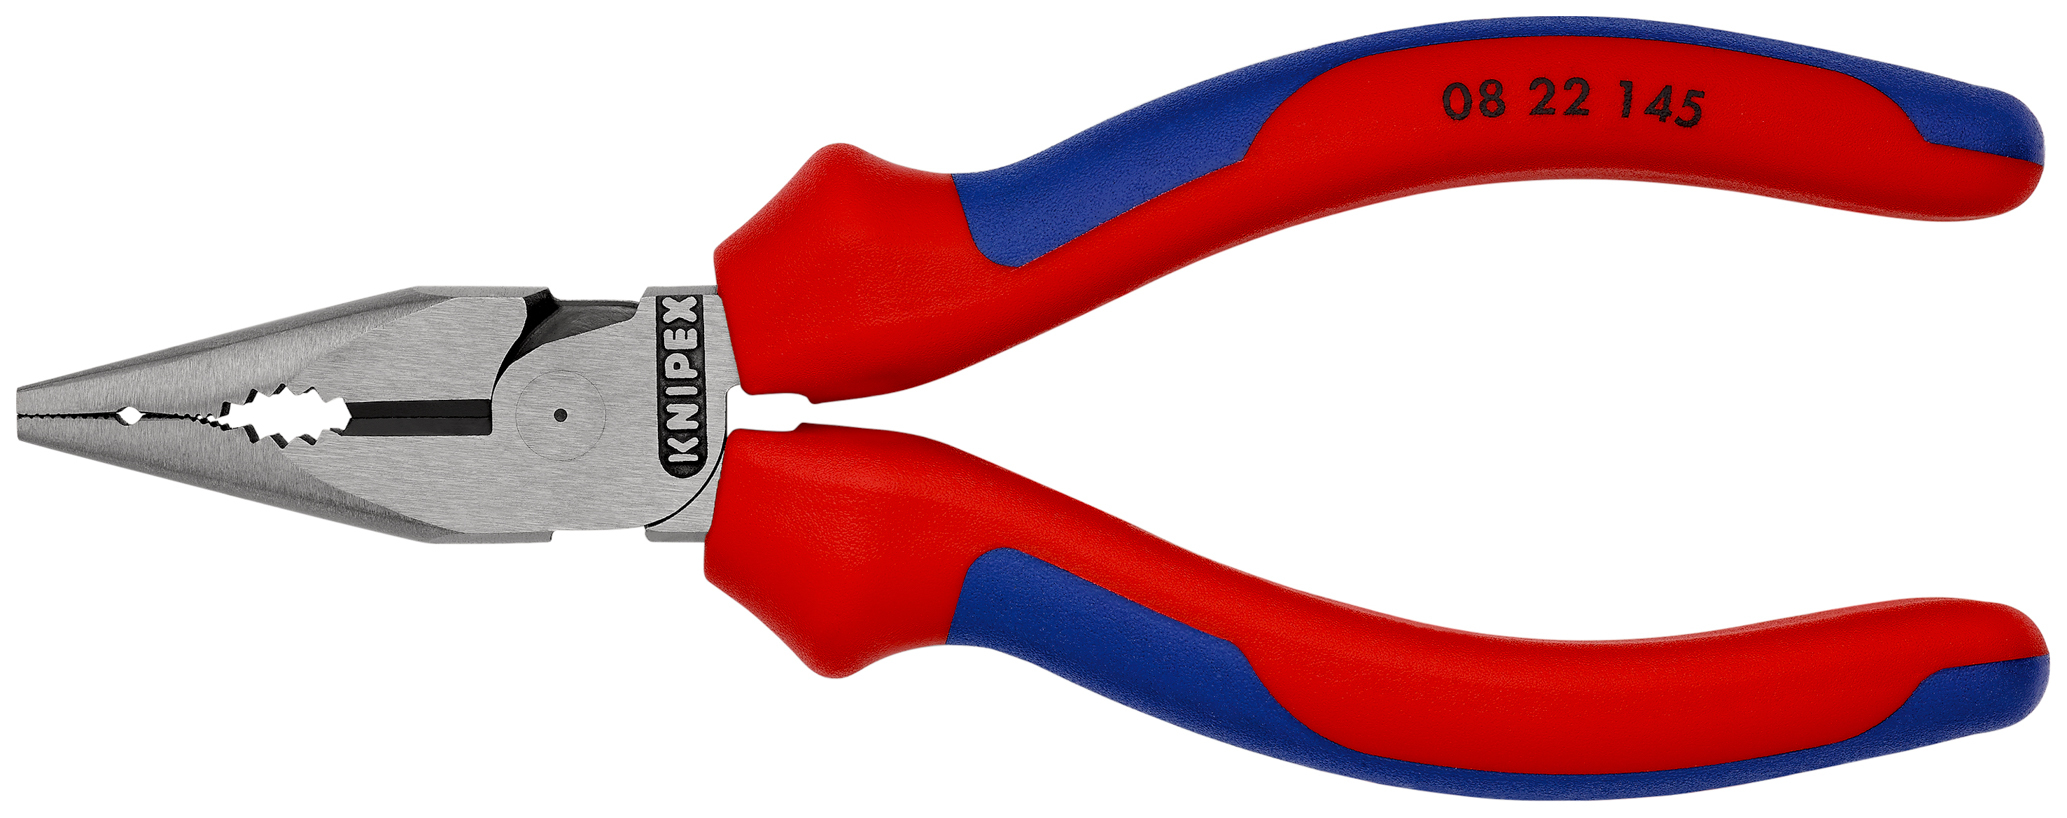 Pince universelle 1/2 ronde 145mm sb KNIPEX - 08 22 145 SB